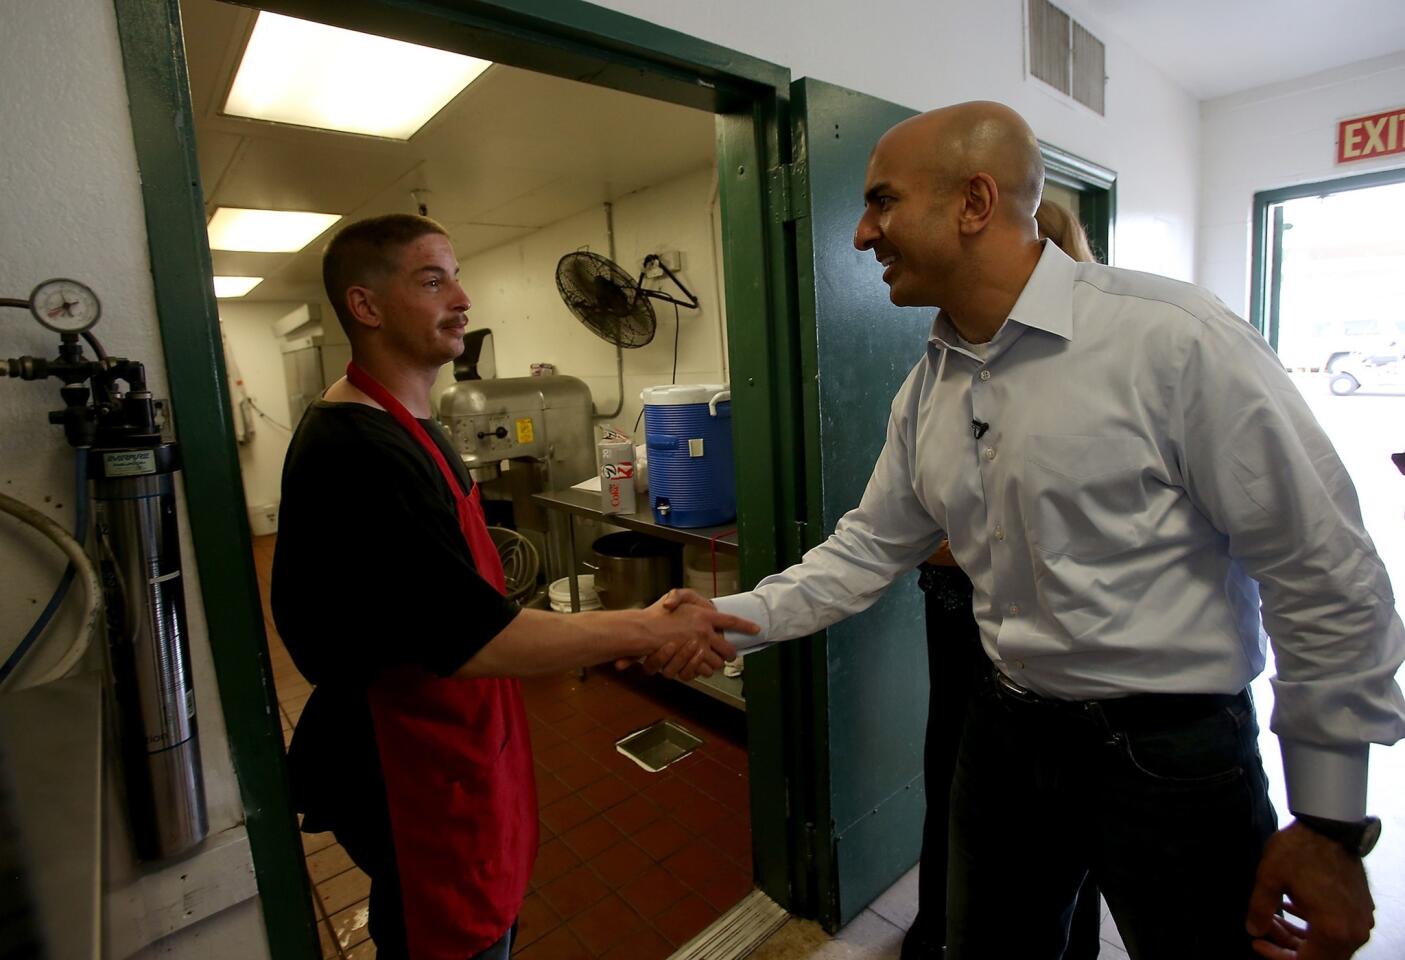 Republican gubernatorial candidate Neel Kashkari tours the Fresno Rescue Mission. Kashkari opposes Gov. Jerry Brown's plan to build a high-speed rail system between the Bay Area and Southern California. The mission is next to the proposed route of the trains.